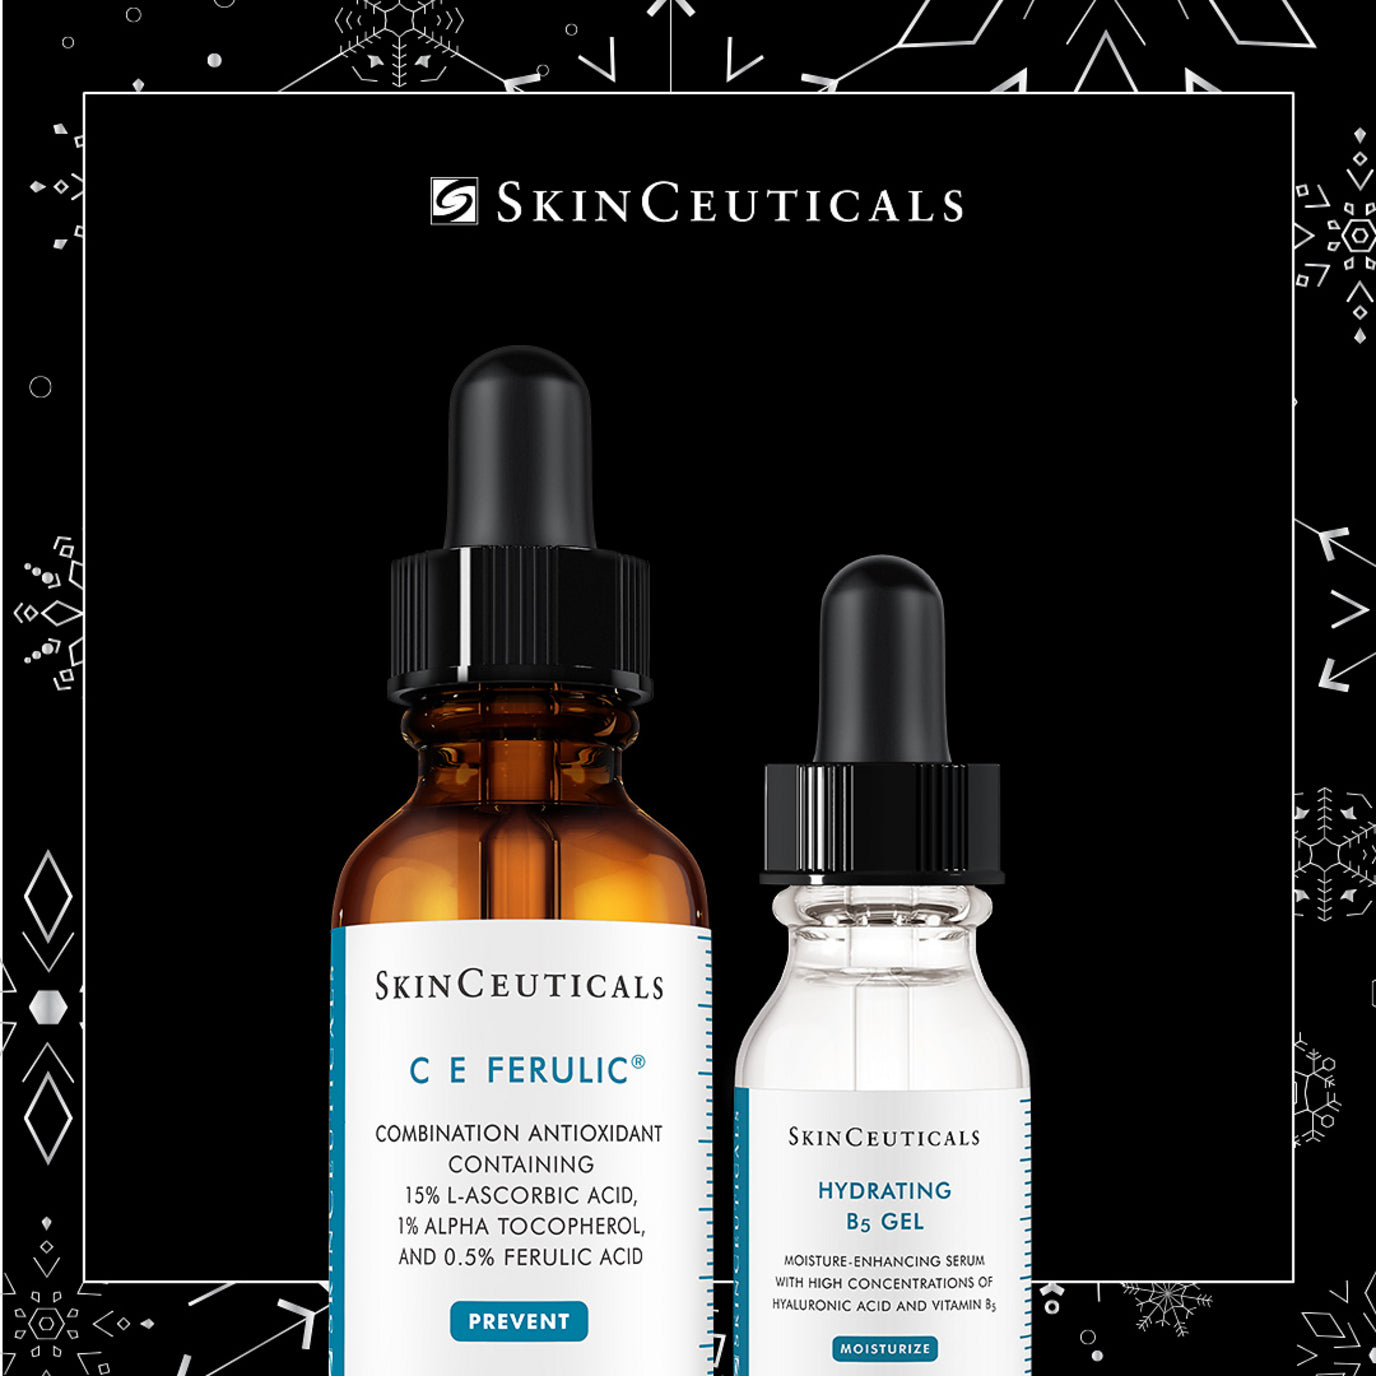 SkinCeuticals Holiday Kit: The Gold Standard (available for purchase on-site at CARE)